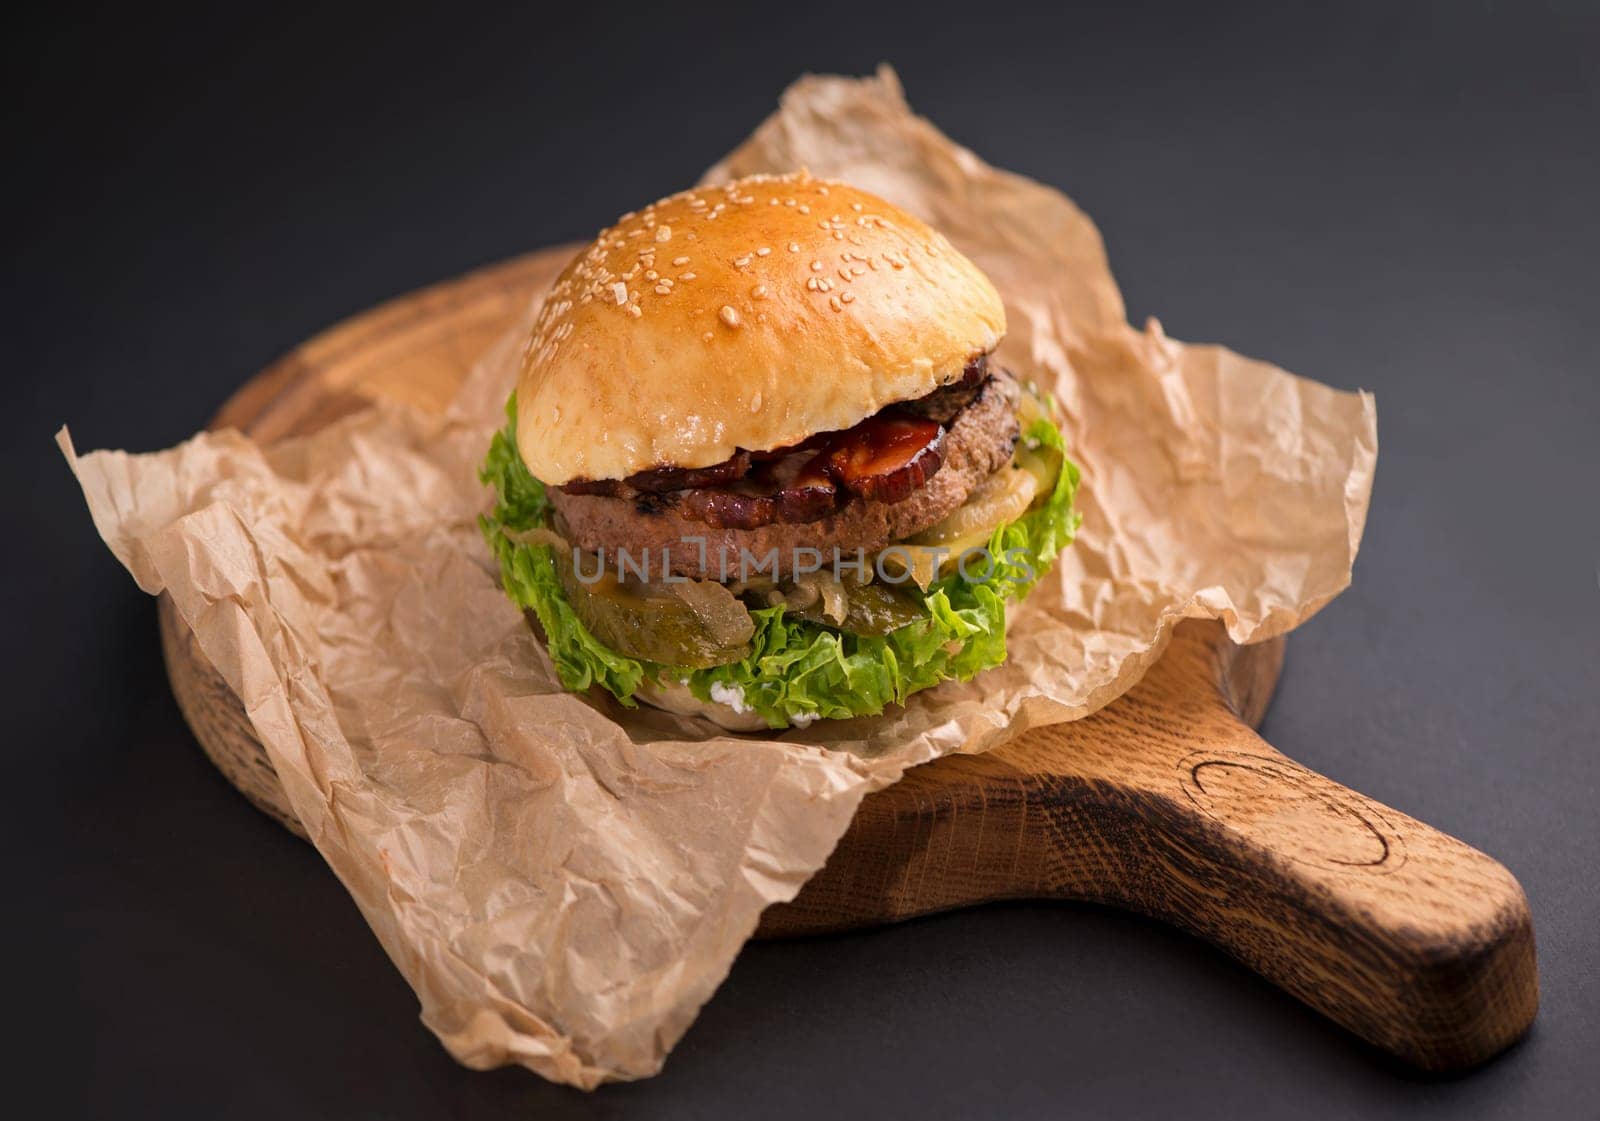 Perfect hamburger classic burger american cheeseburger with cheese, bacon, tomato and lettuce